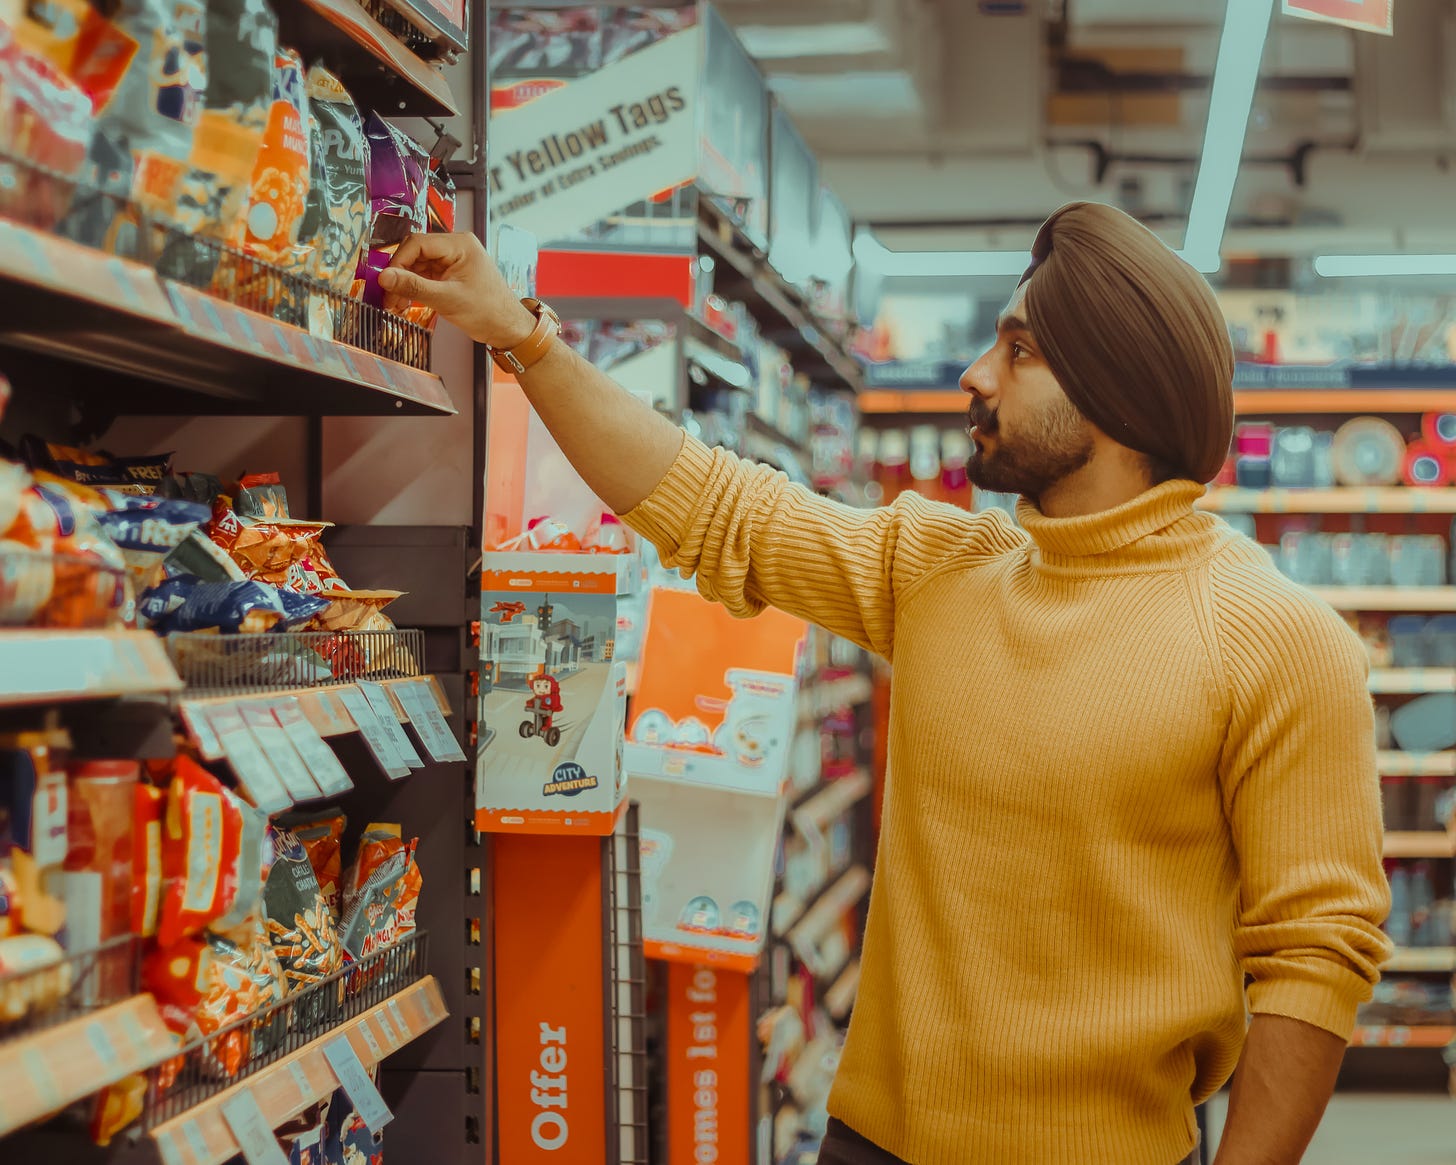 A man wearing a yellow sweater, browsing in a supermarket aisle